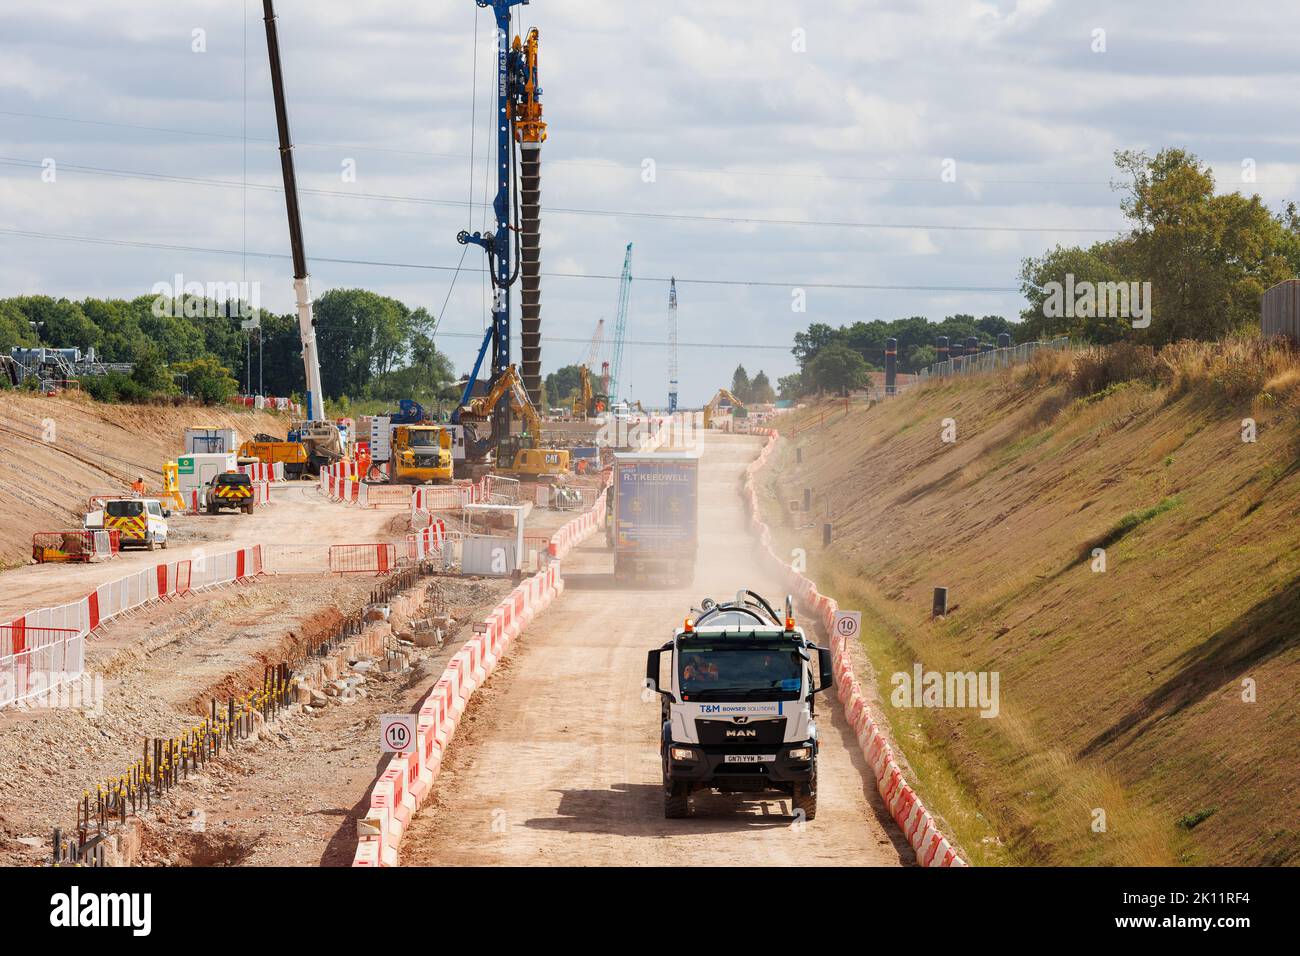 Construction of the HS2 Rail network taking place at Waste Lane near Berkswell, Warwickshire. The picture shows construction work near waste lane, looking towards Burton Green. Stock Photo